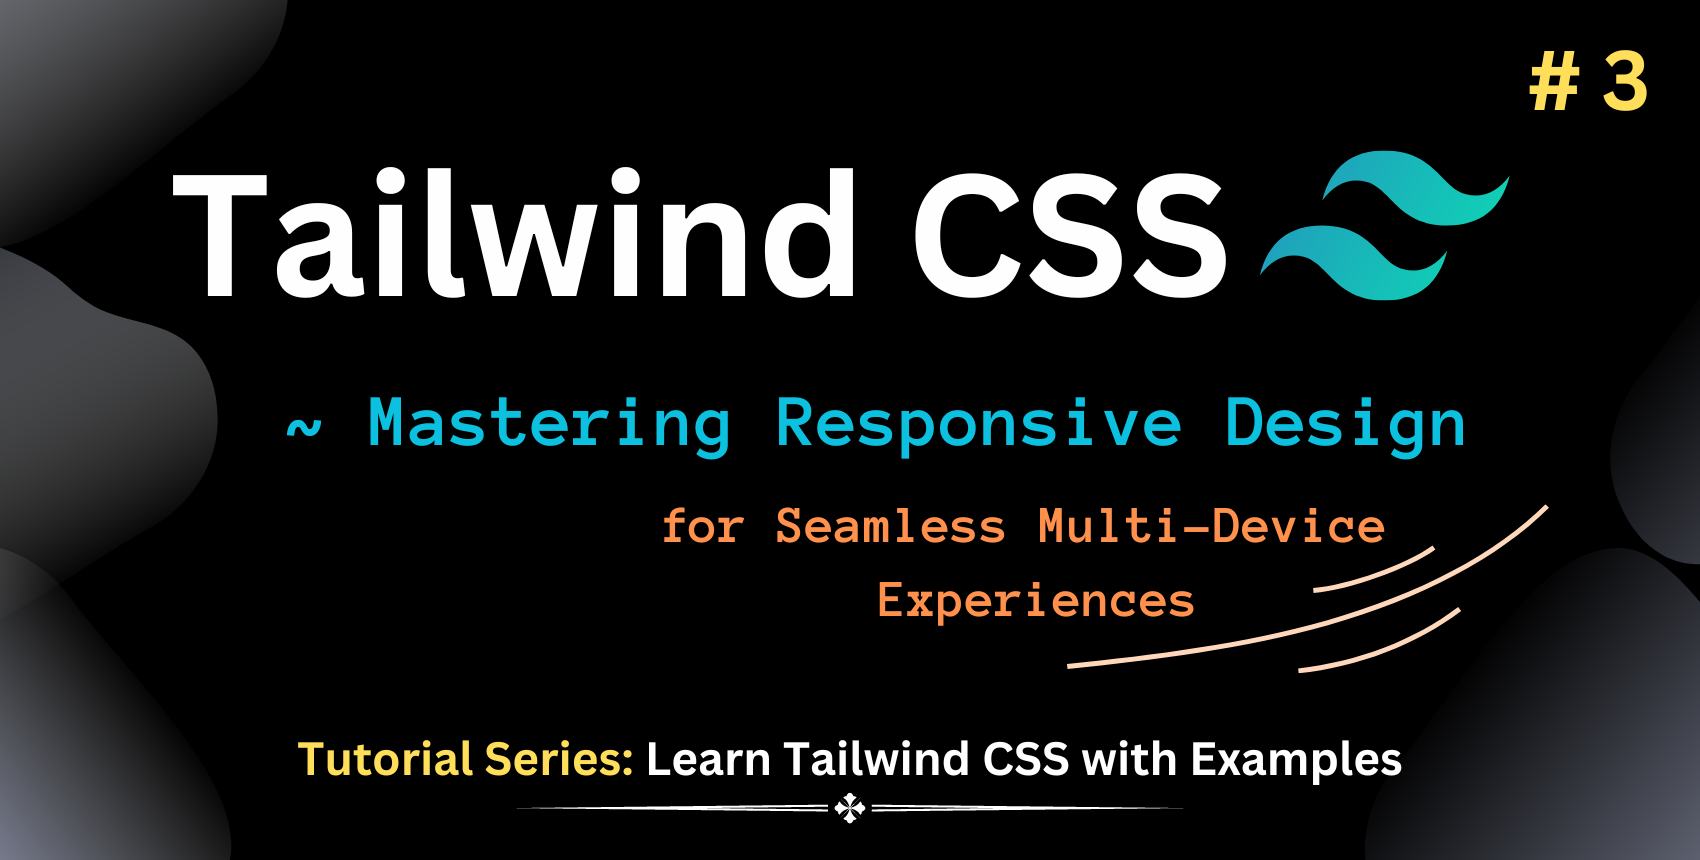 Learn Tailwind CSS: Mastering Responsive Design 